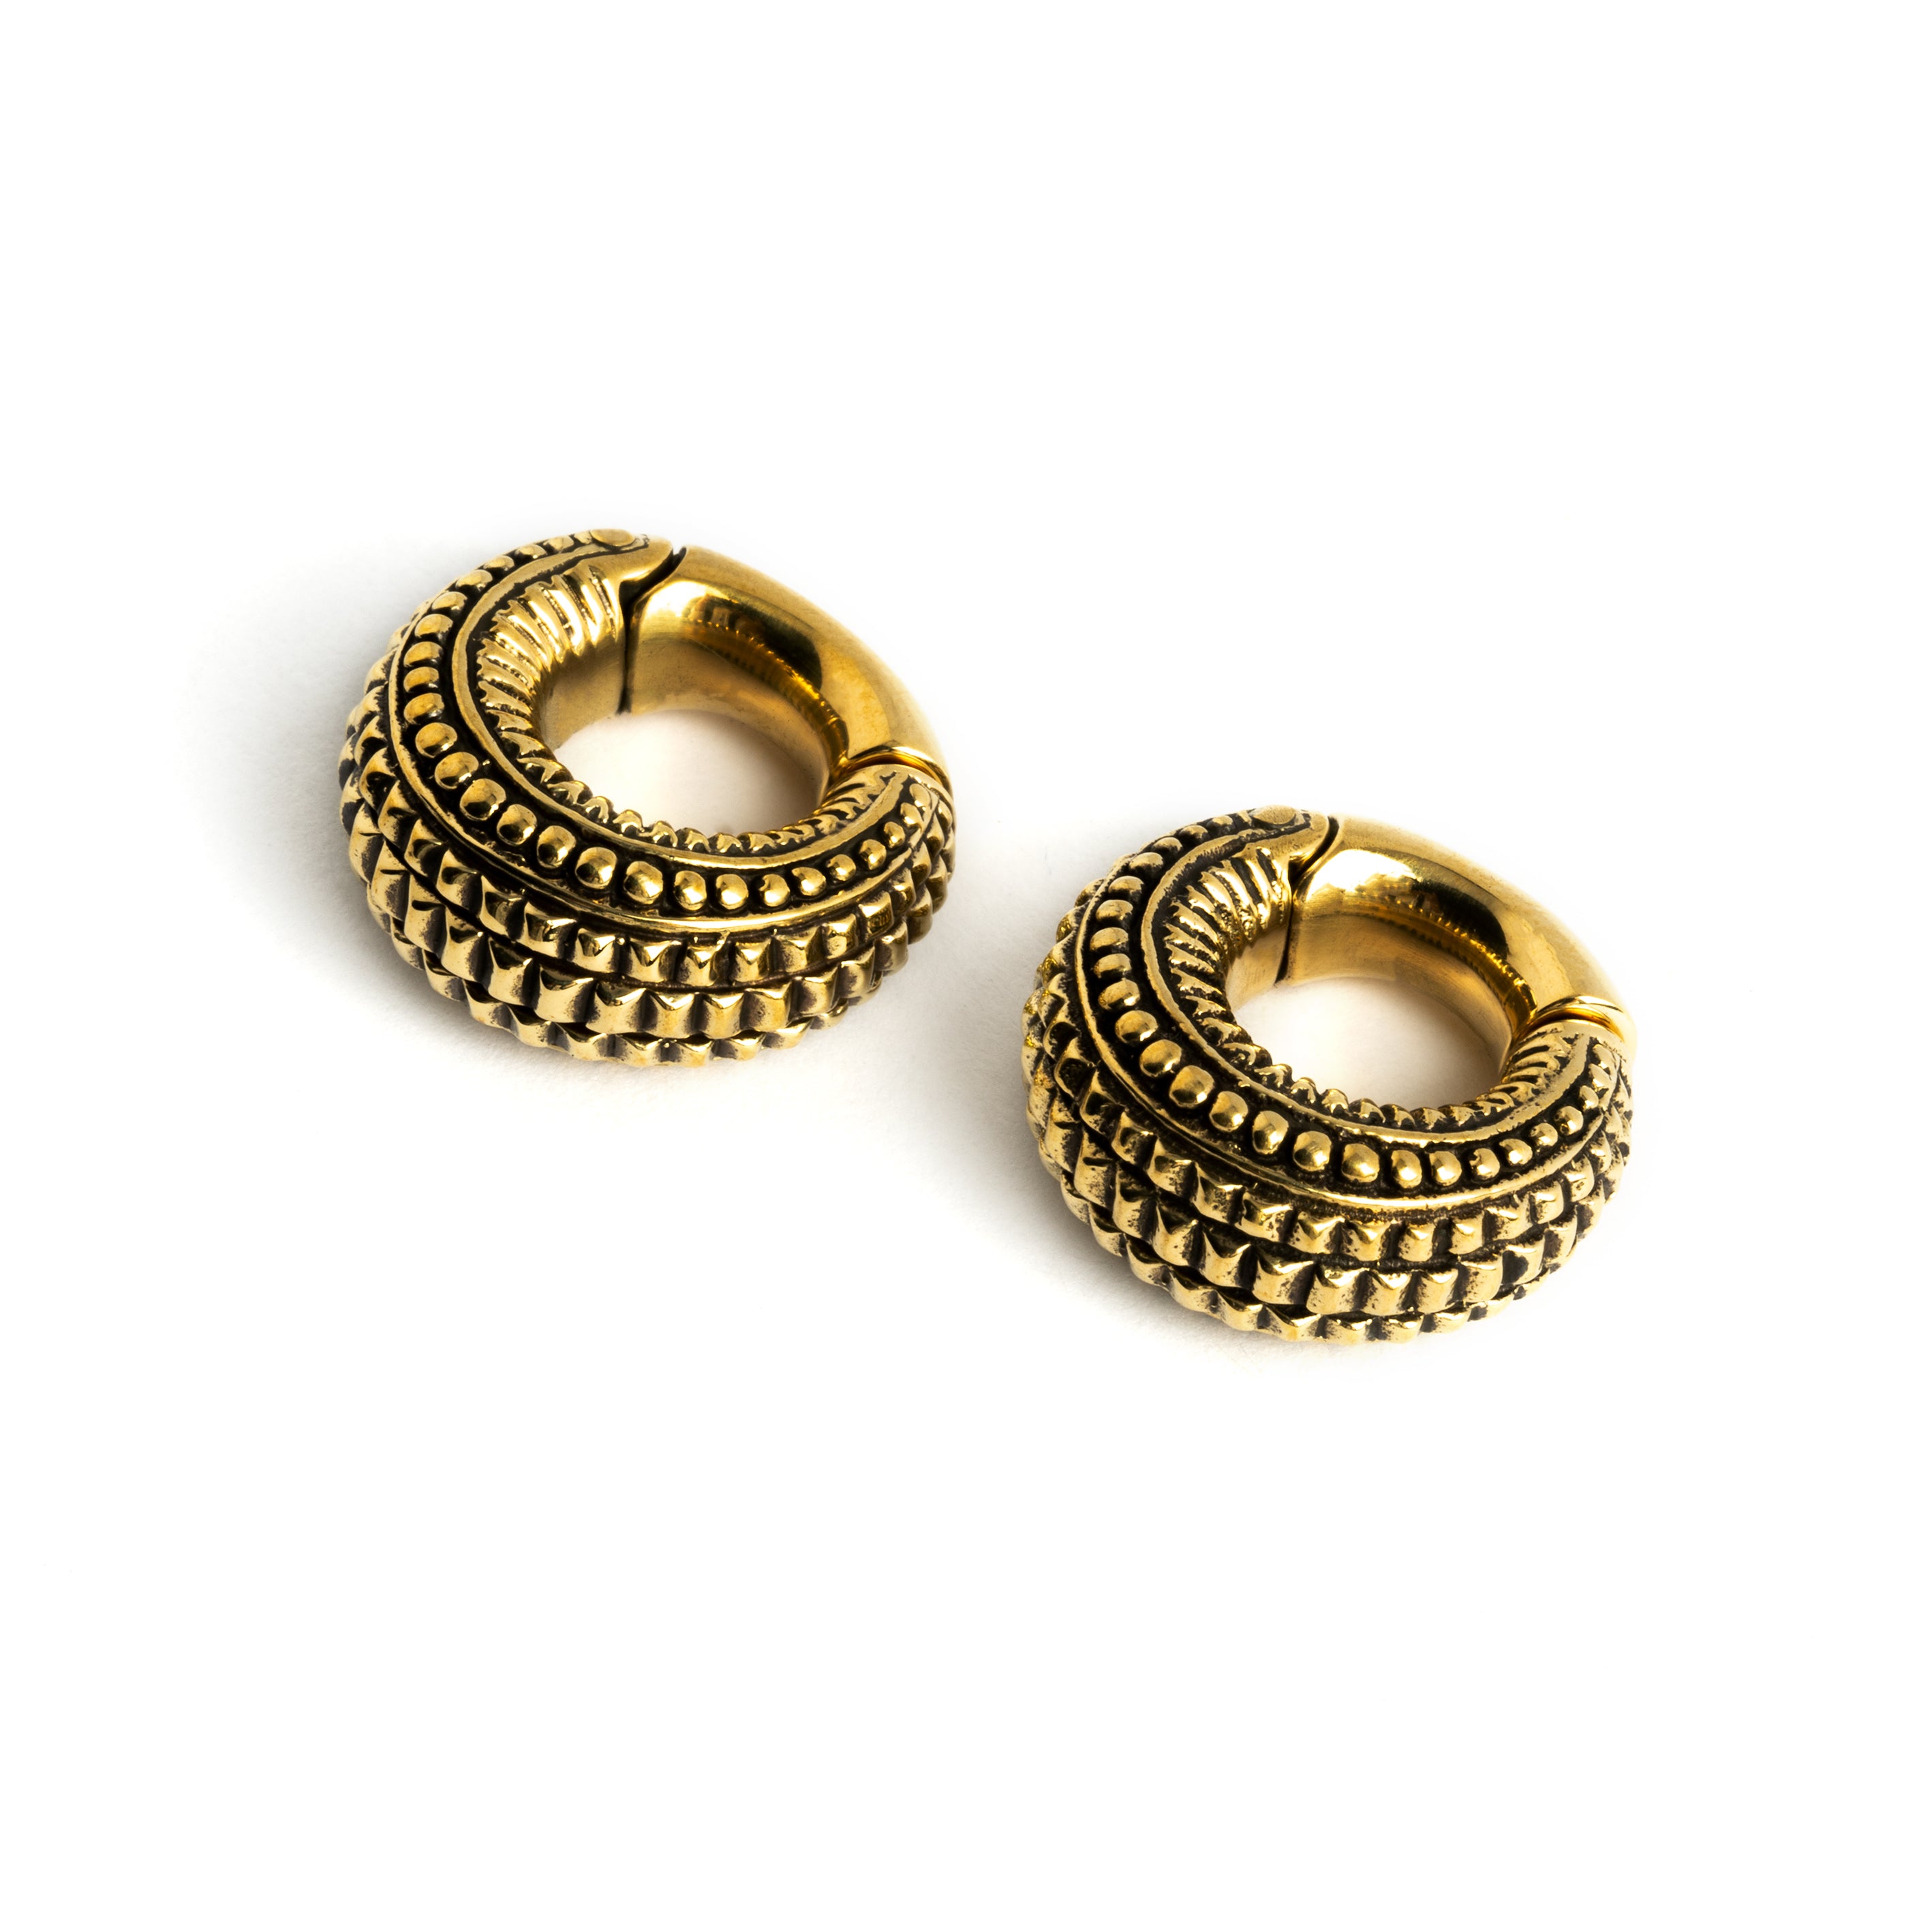 pair of 6g gold brass tribal ear weights hoops side view